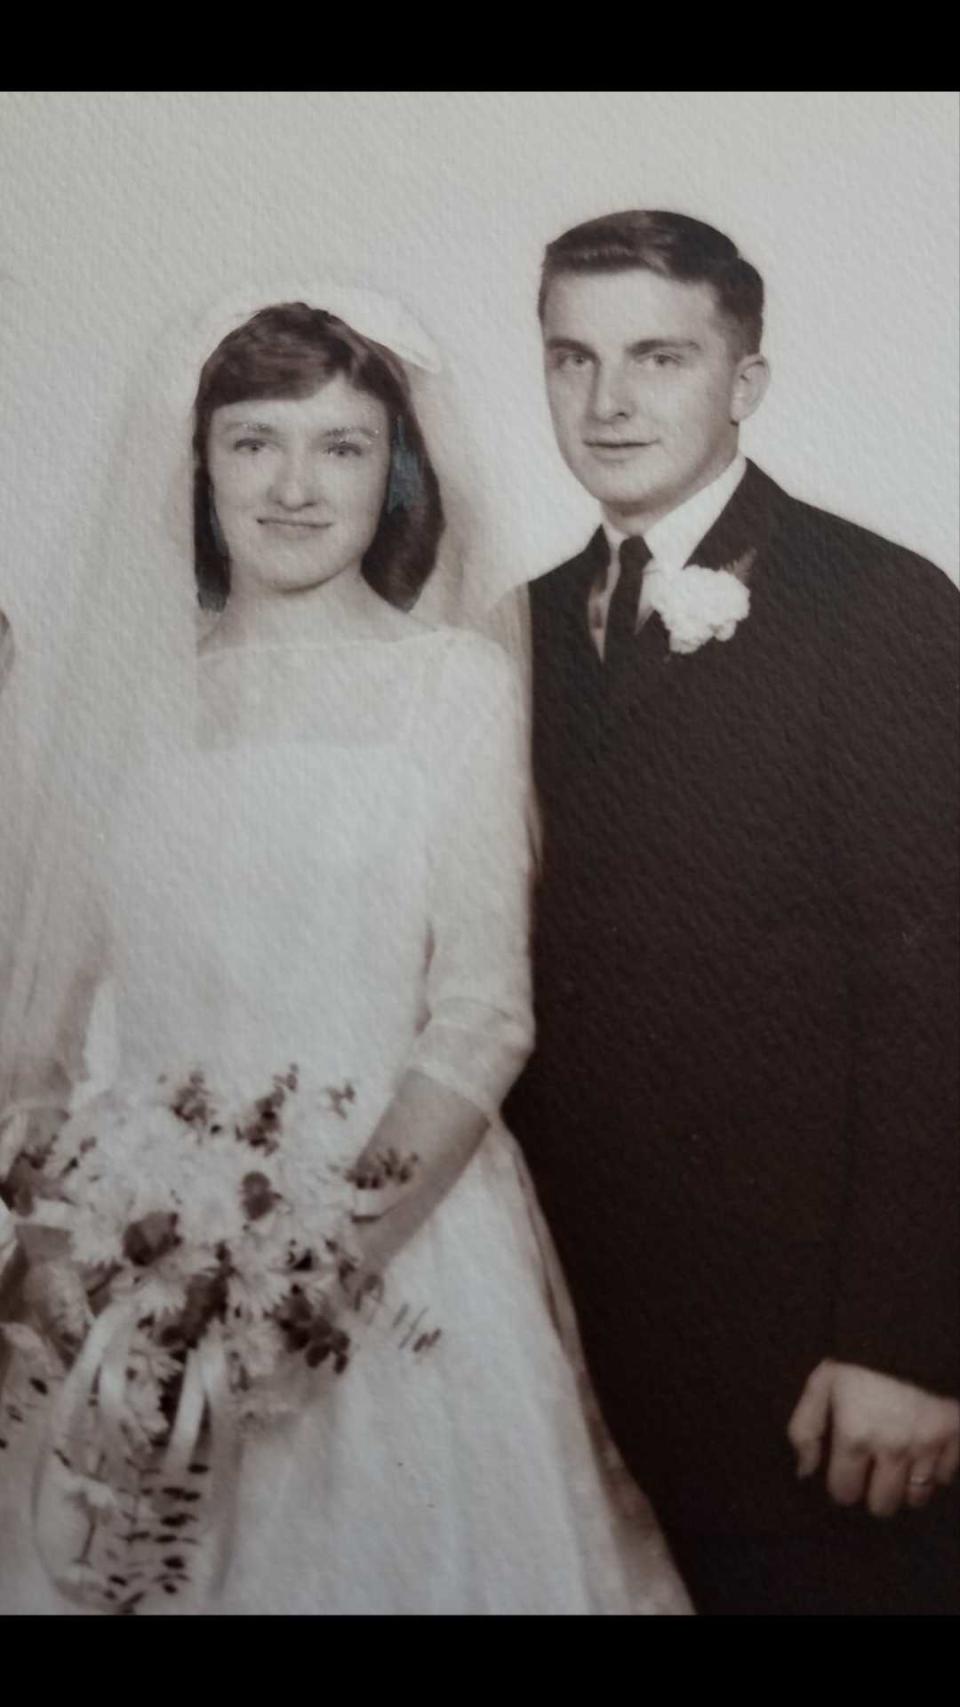 The couple in 1962